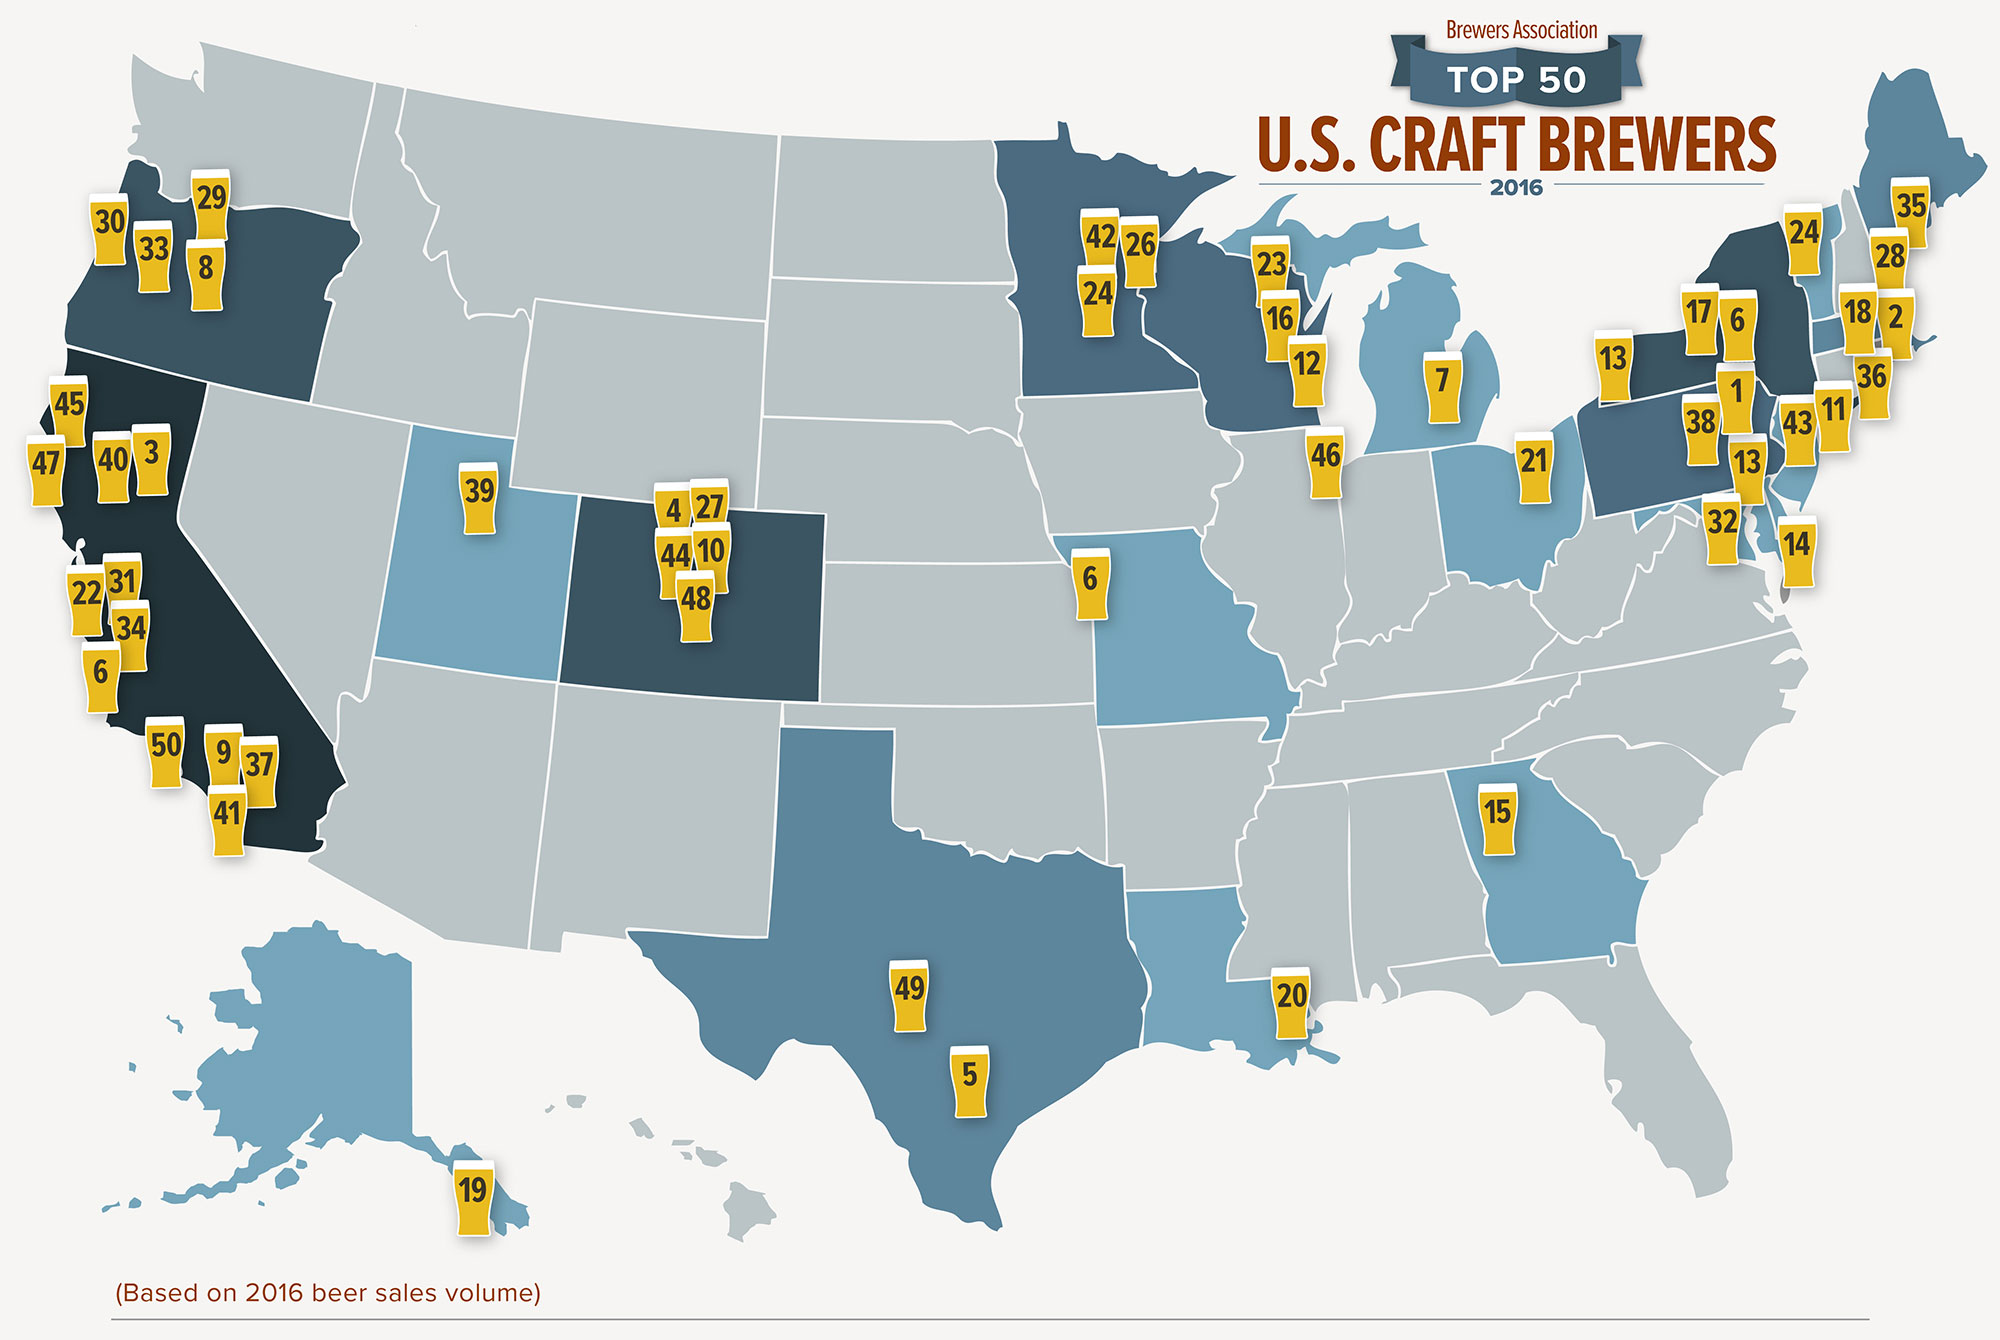 What We Learned From the BA’s List of the Biggest Craft Brewers of 2016